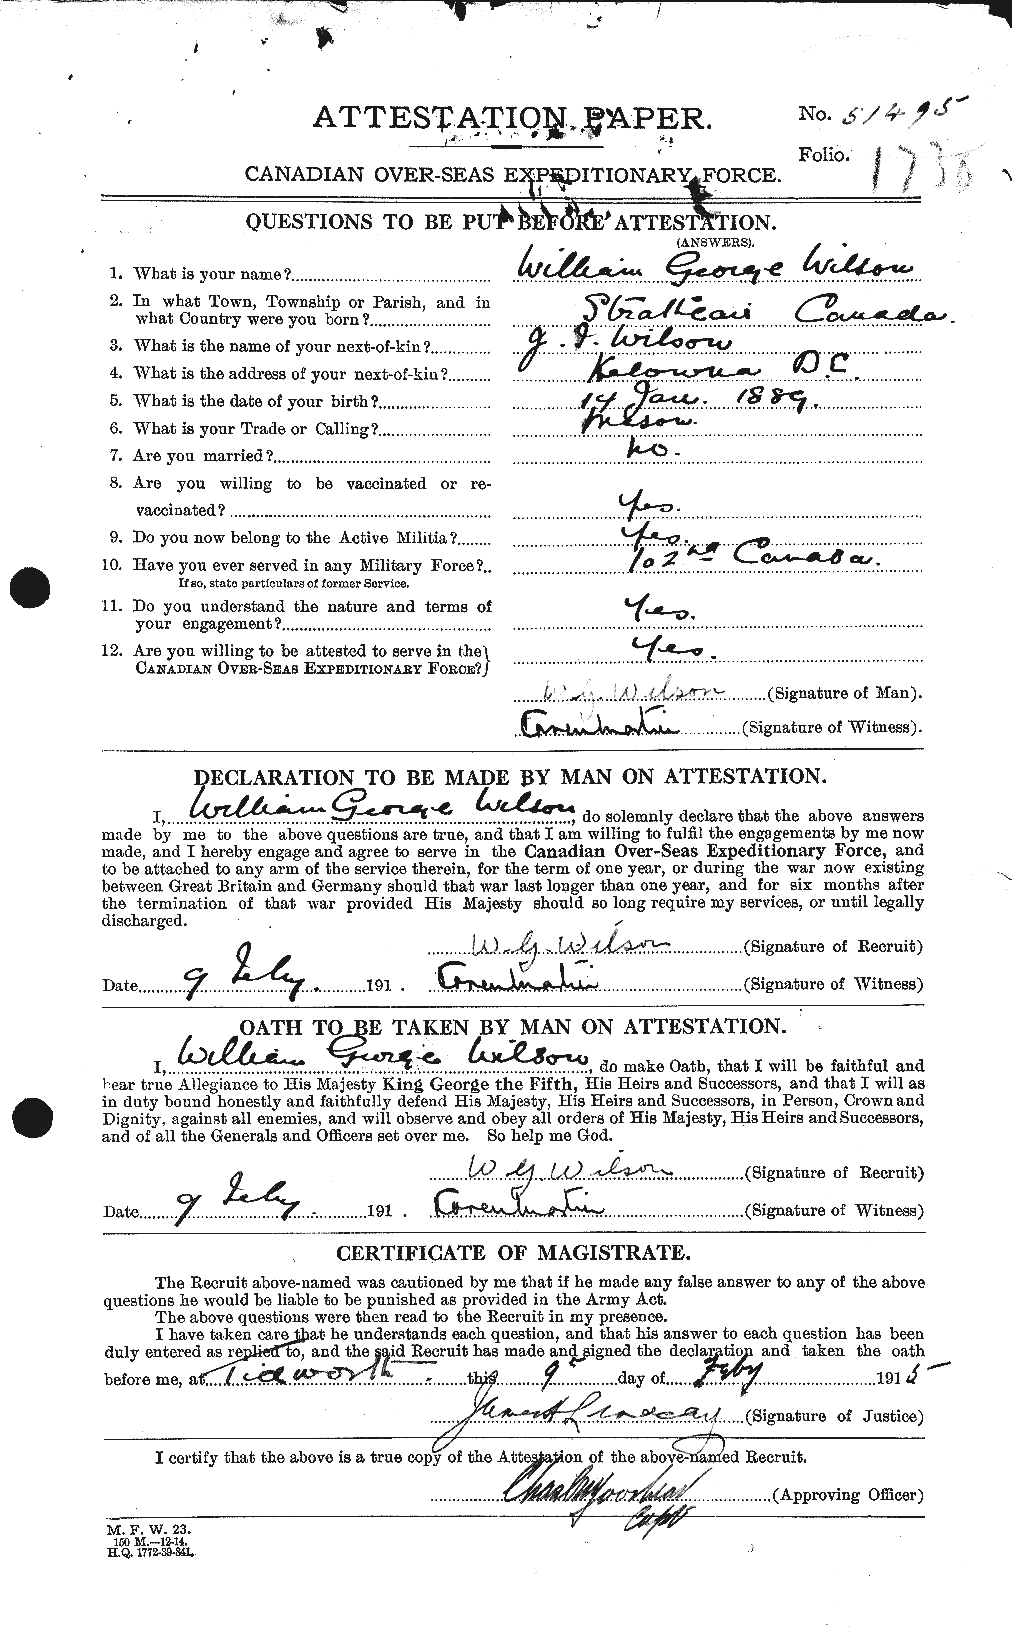 Personnel Records of the First World War - CEF 682003a